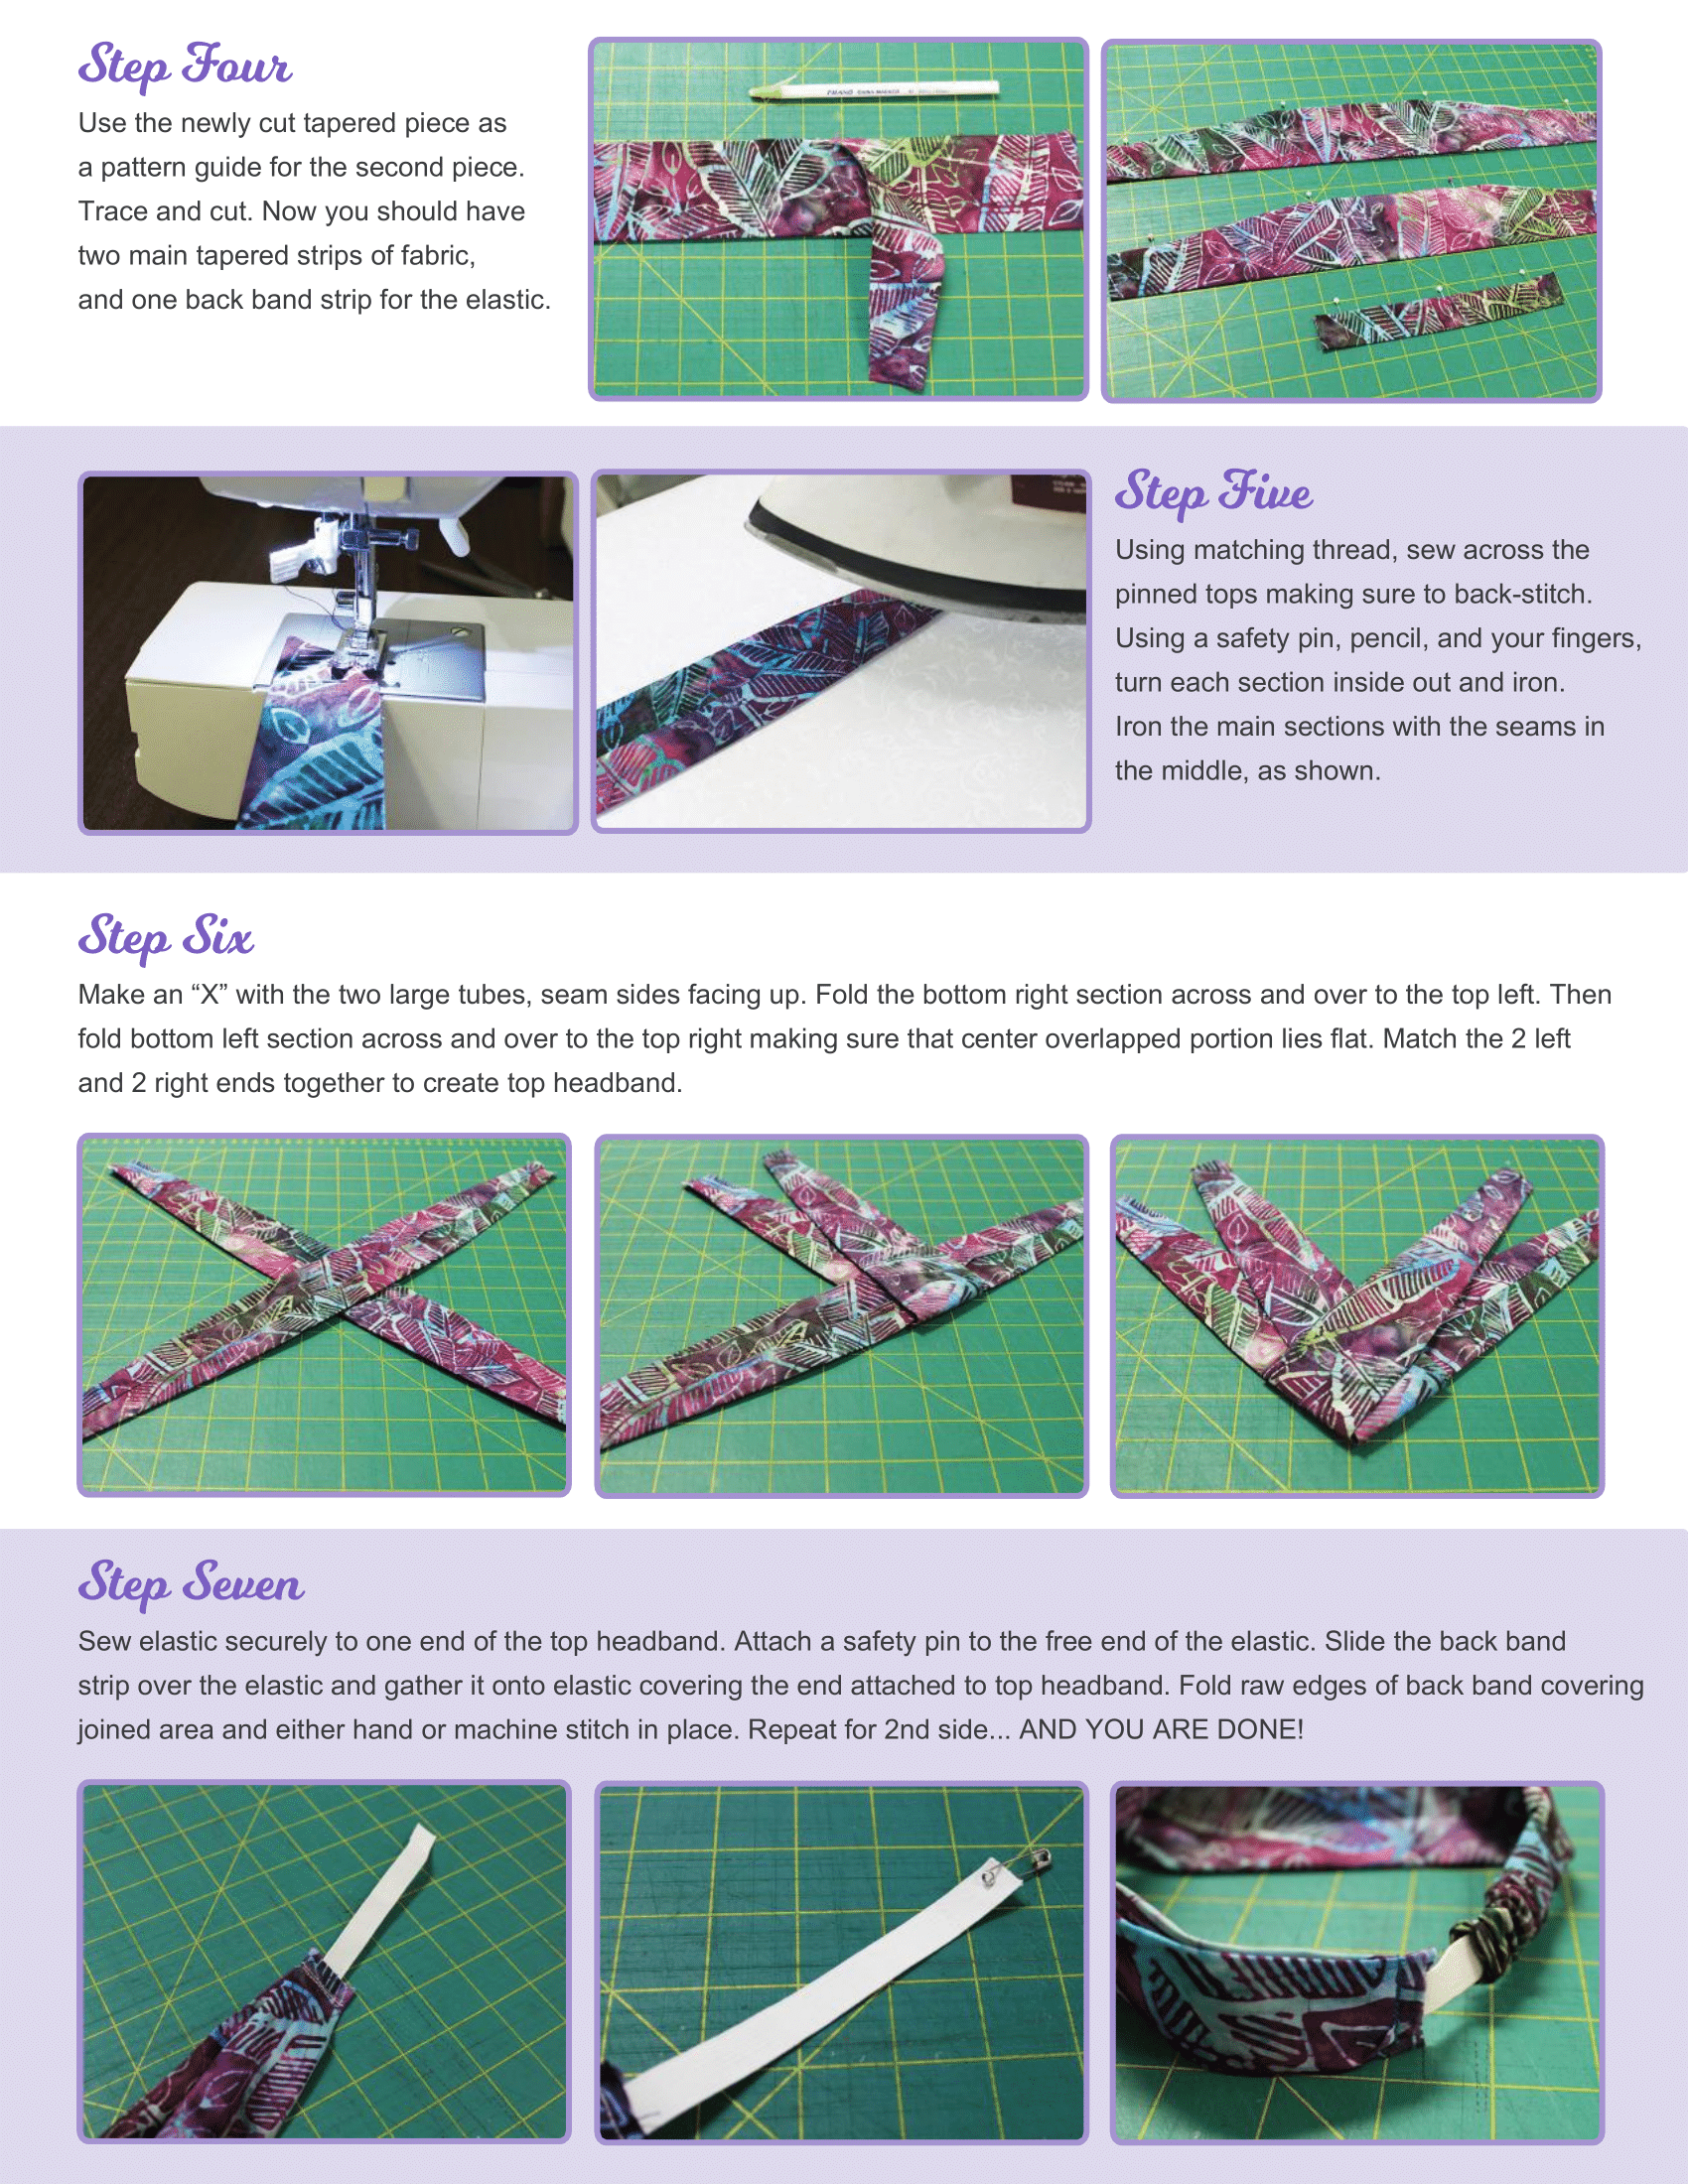 Continued steps to create yoru fashionable headband for your hair